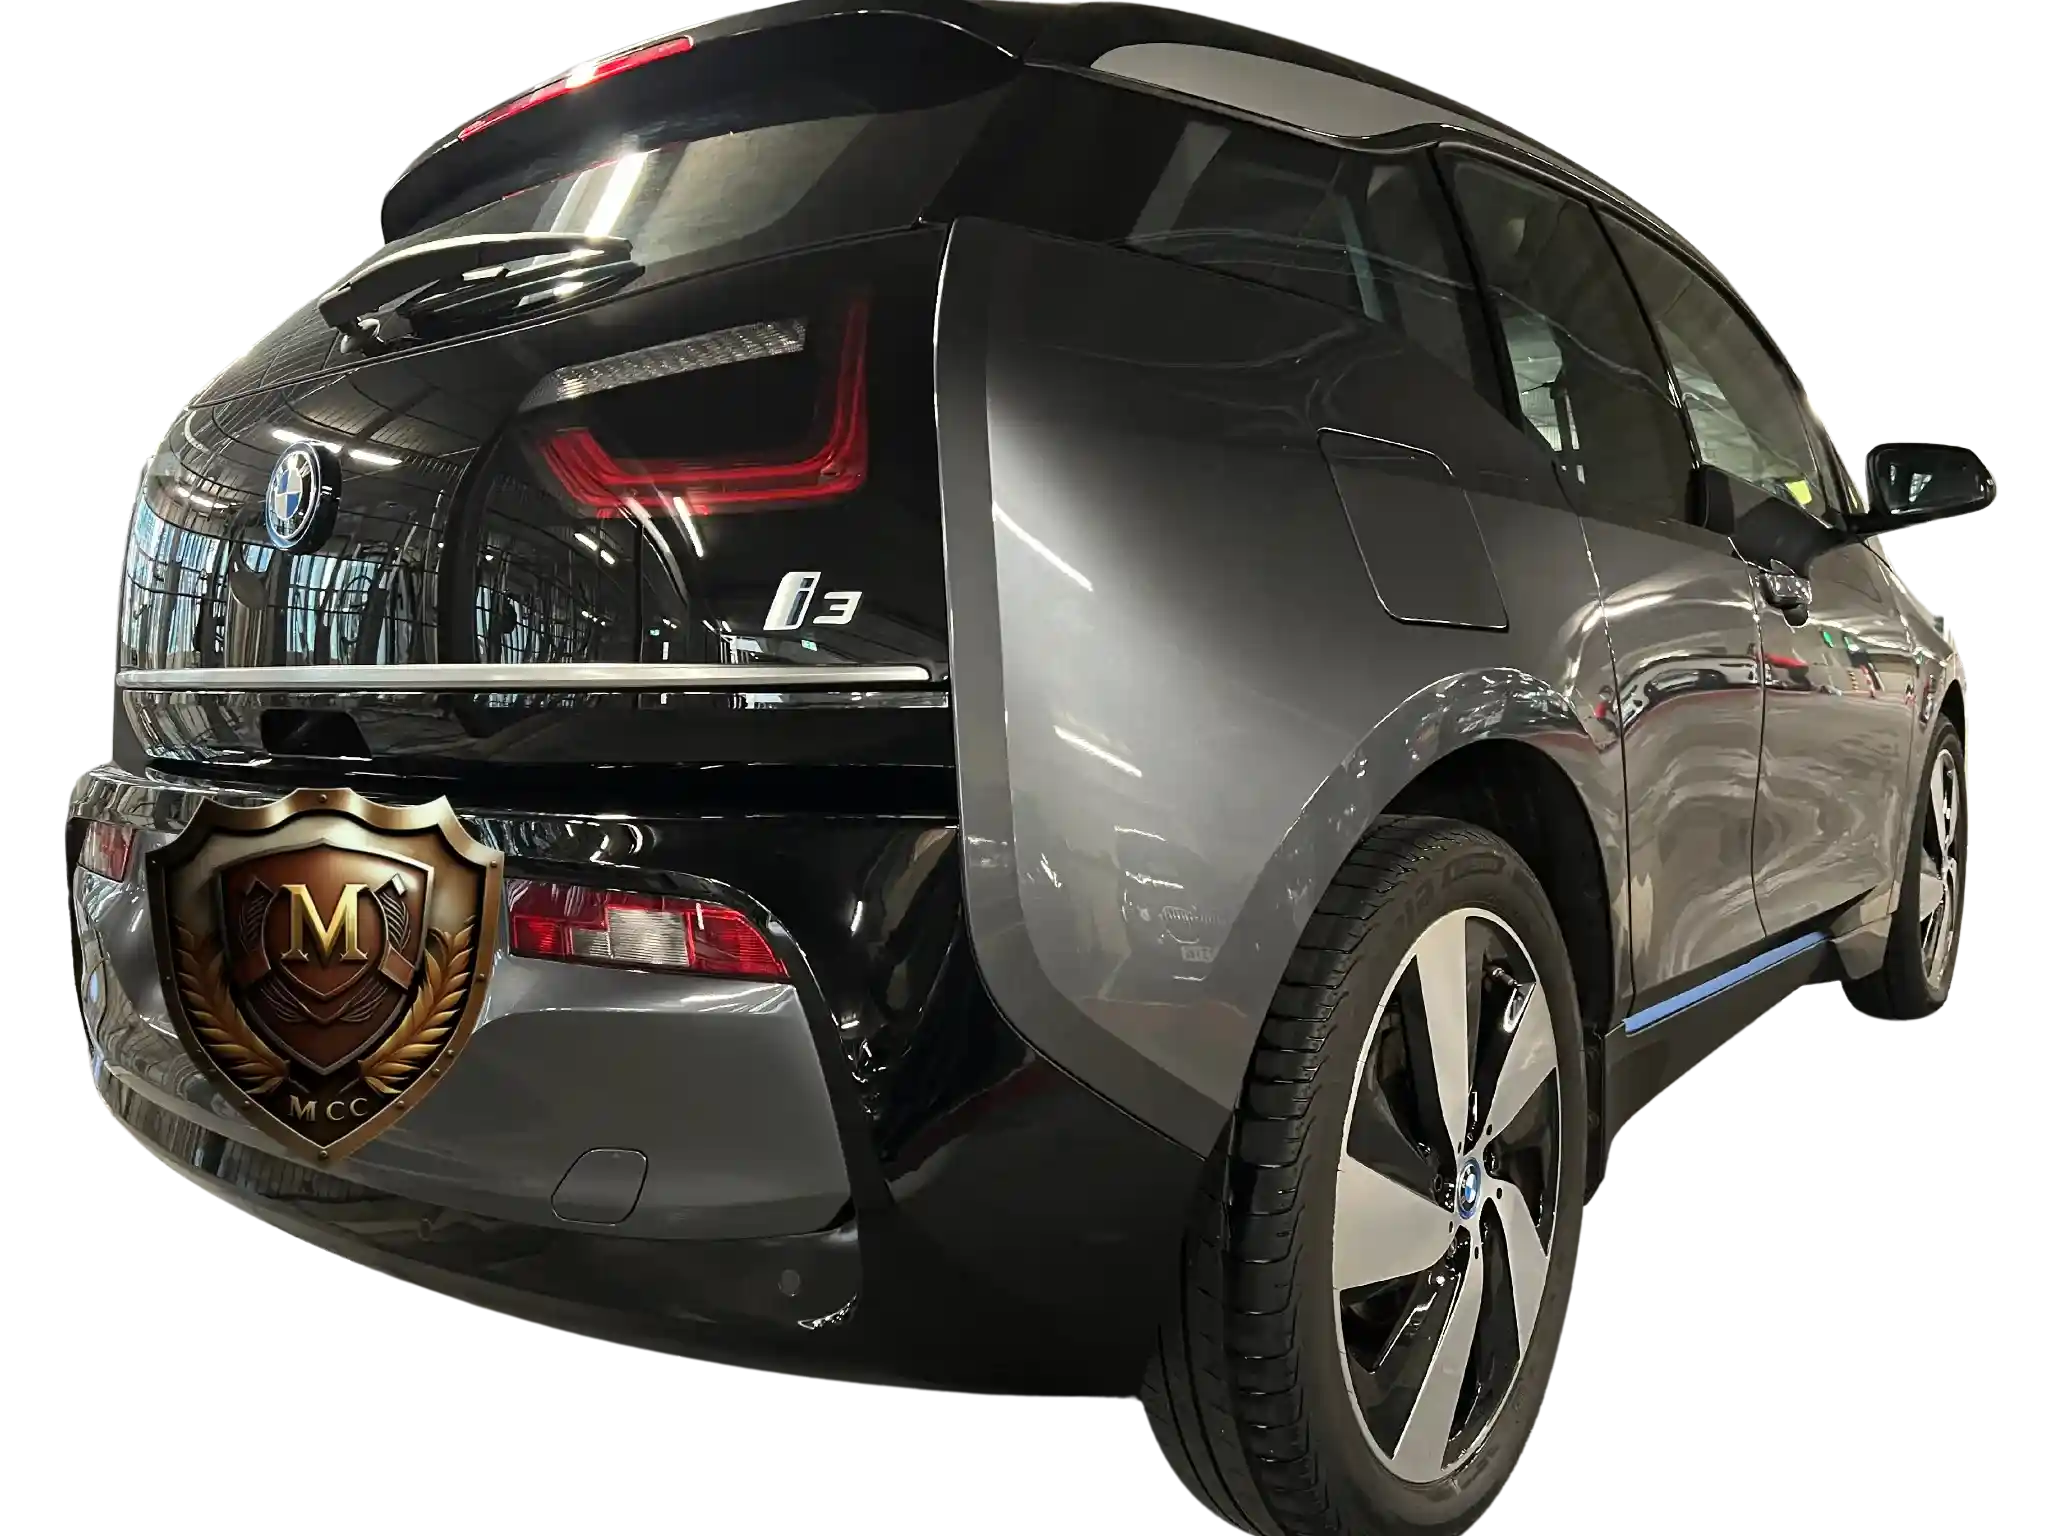 Environmentally friendly BMW i3 enhanced by sustainable waterless valeting, reflecting corporate green initiatives.